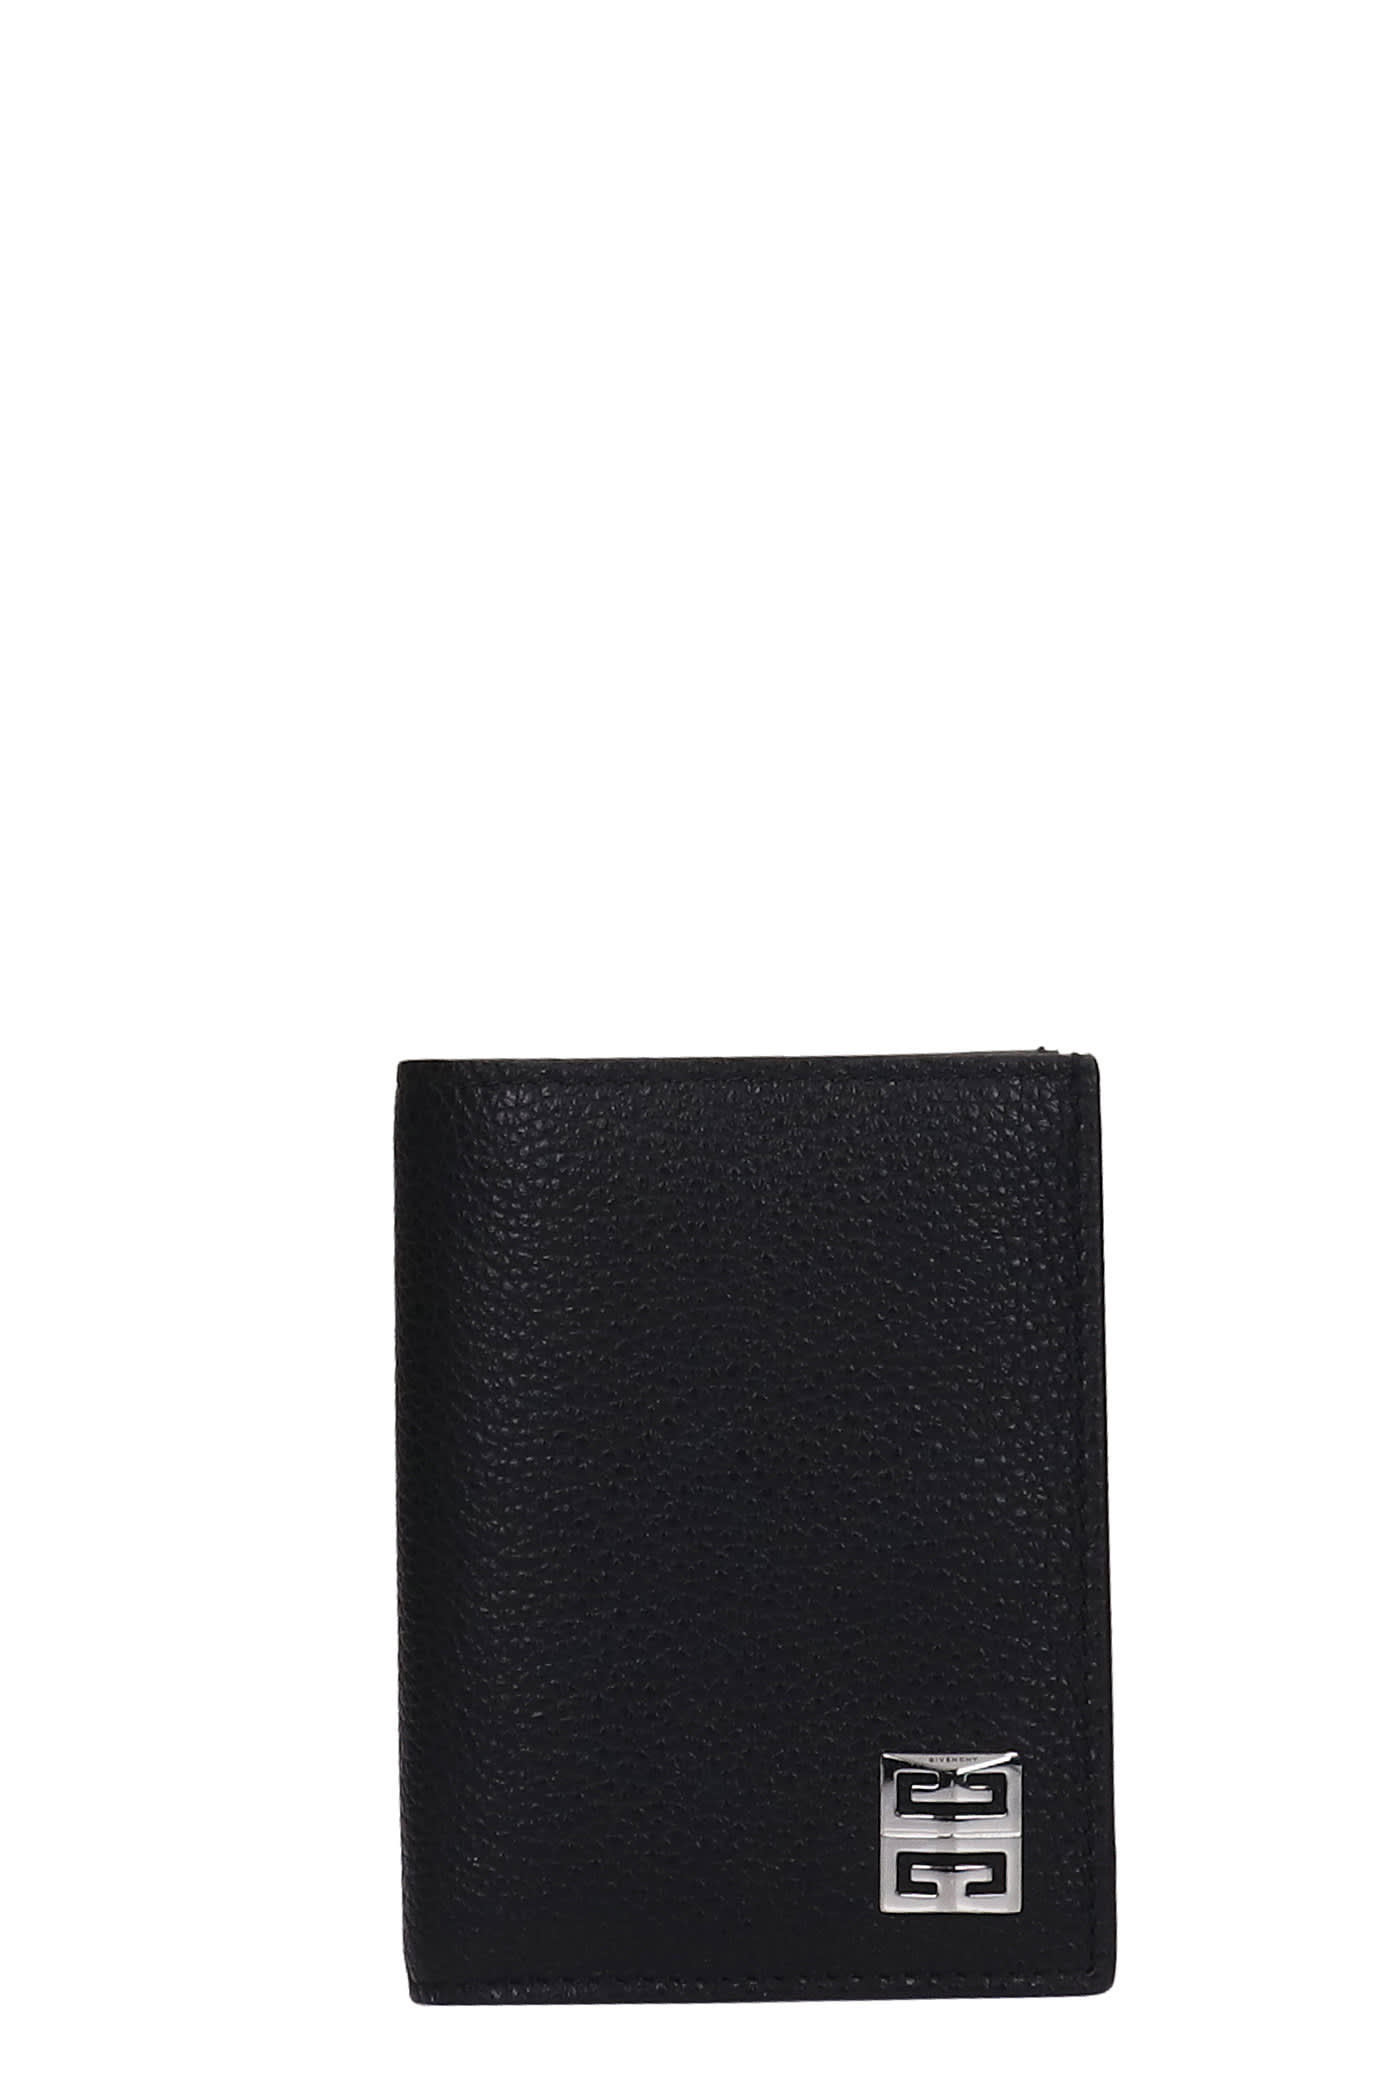 Givenchy Wallet In Black Leather